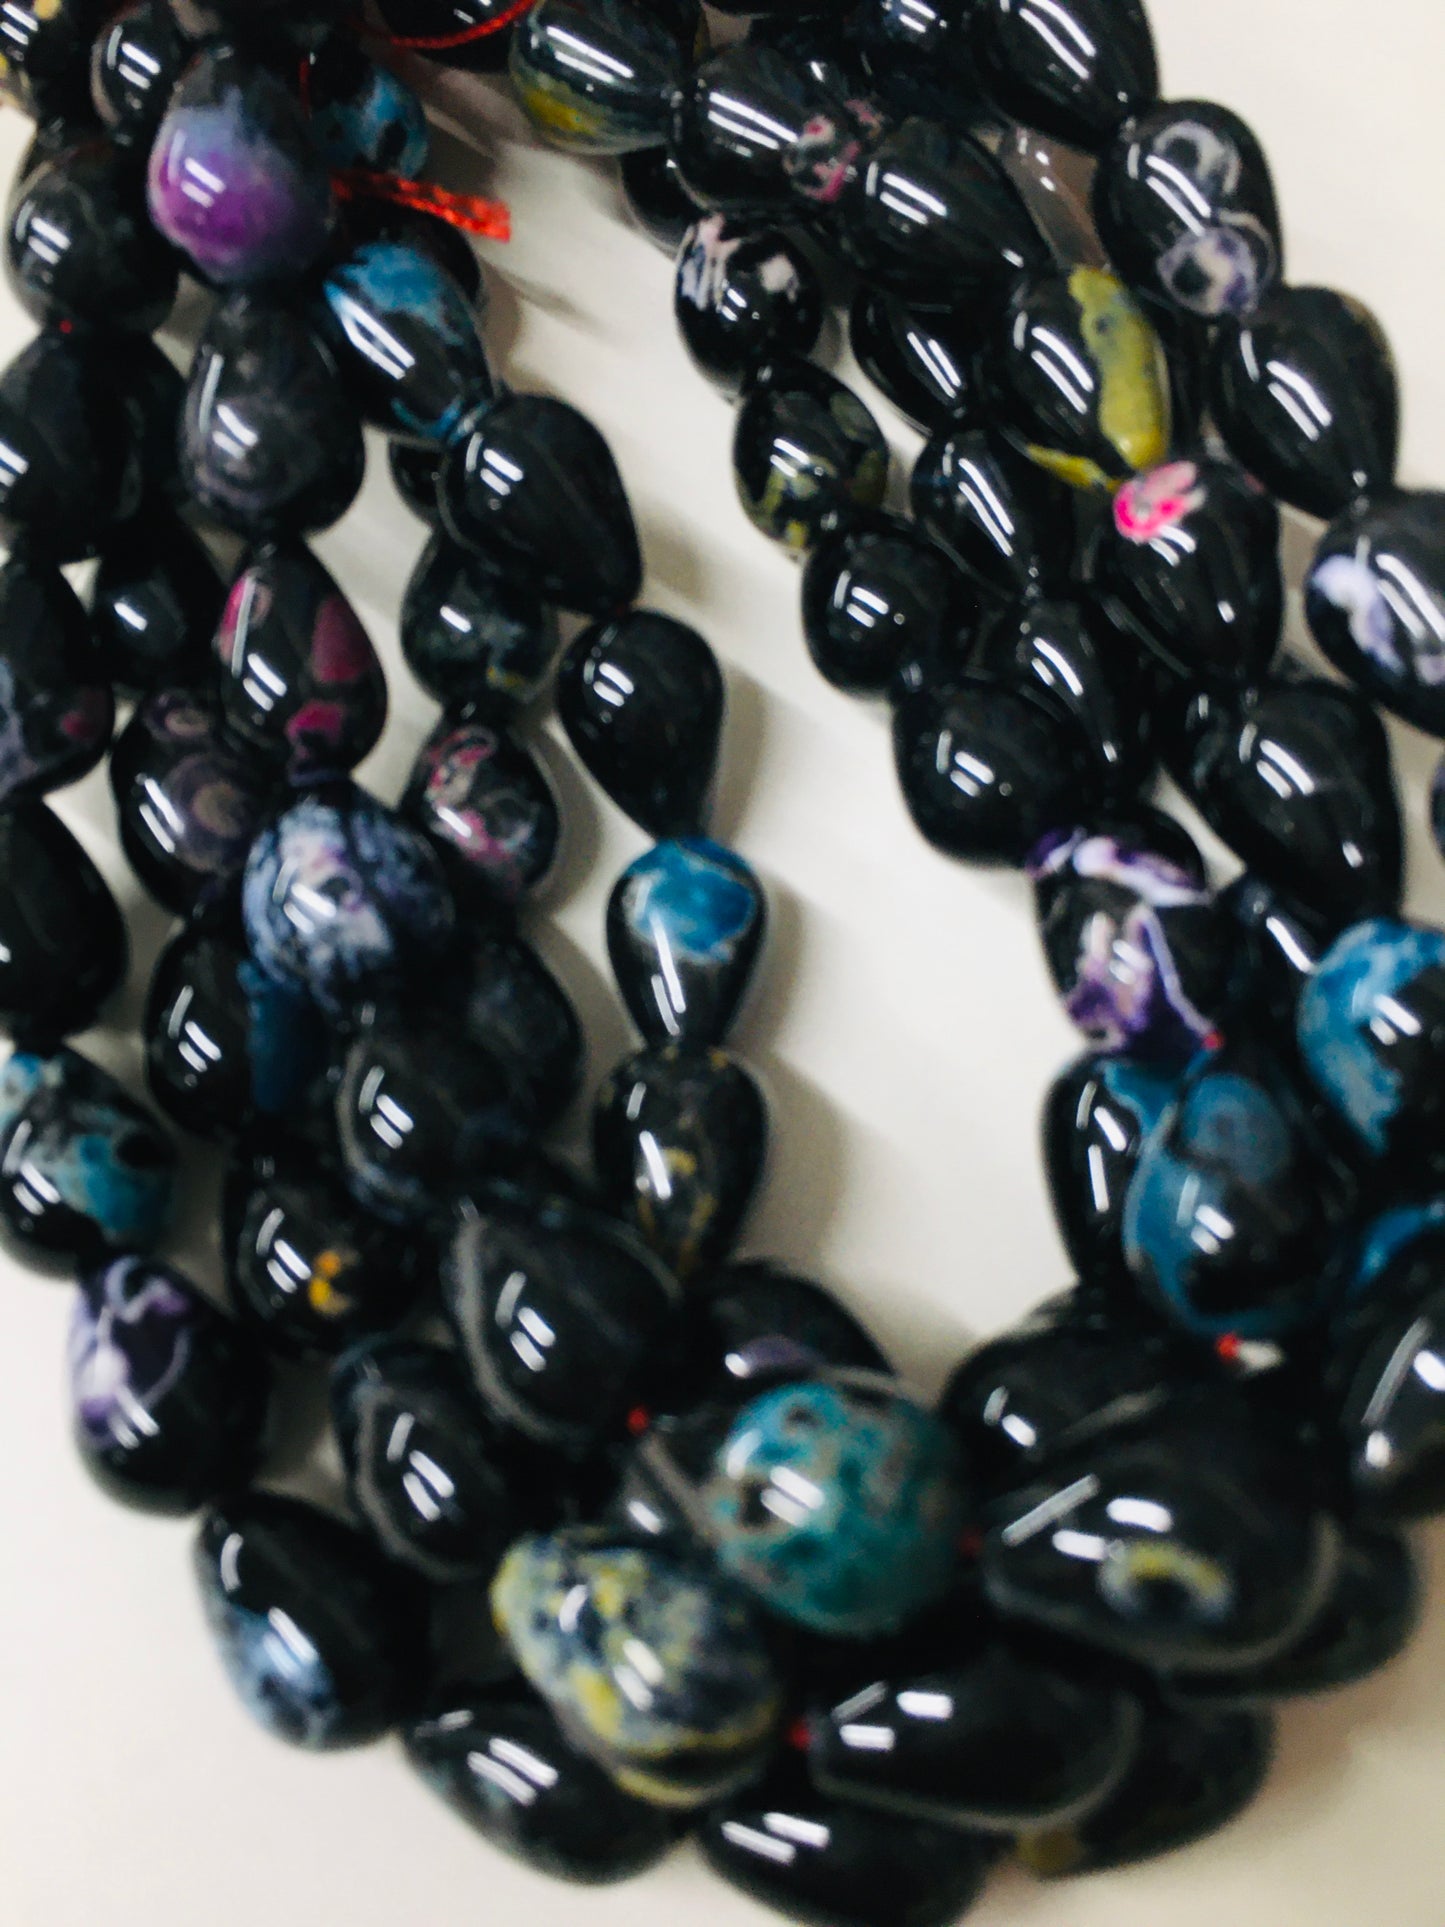 18mm Black with Different Colors Drop Agate / Agata